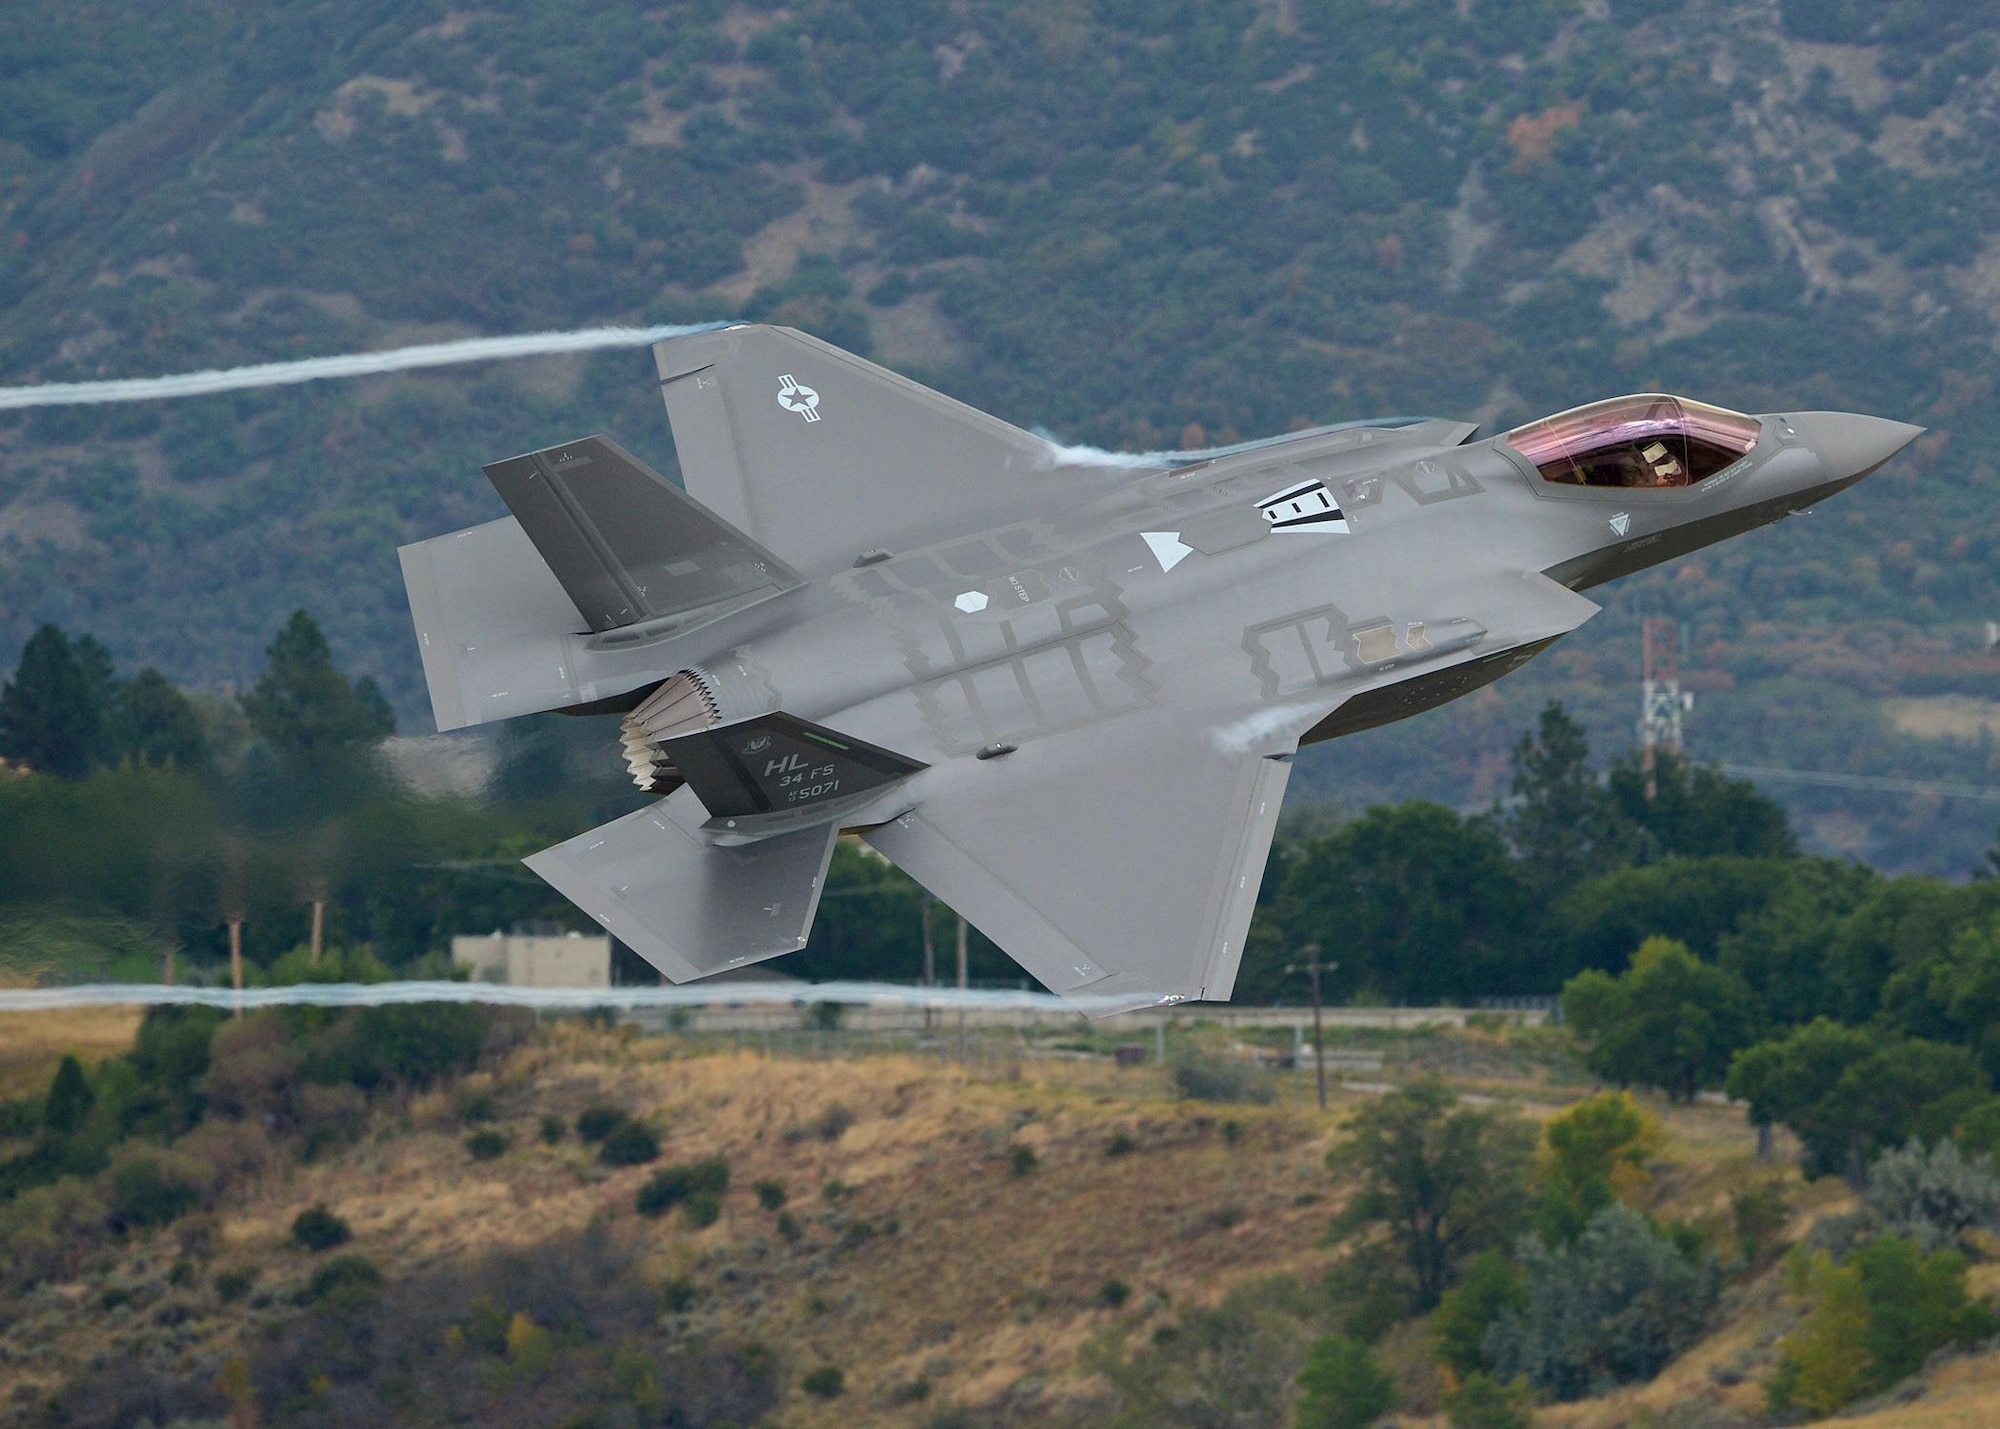 Lt. Col. George Watkins, the 34th Fighter Squadron commander, flies a combat-coded F-35A Lightning II aircraft past the control tower at Hill Air Force Base, Utah, Sept. 17, 2015. During the sortie, the base’s first, Watkins conducted mission qualification training focusing on weapons employment, range familiarization and mission system proficiency. (U.S. Air Force photo/Alex R. Lloyd)